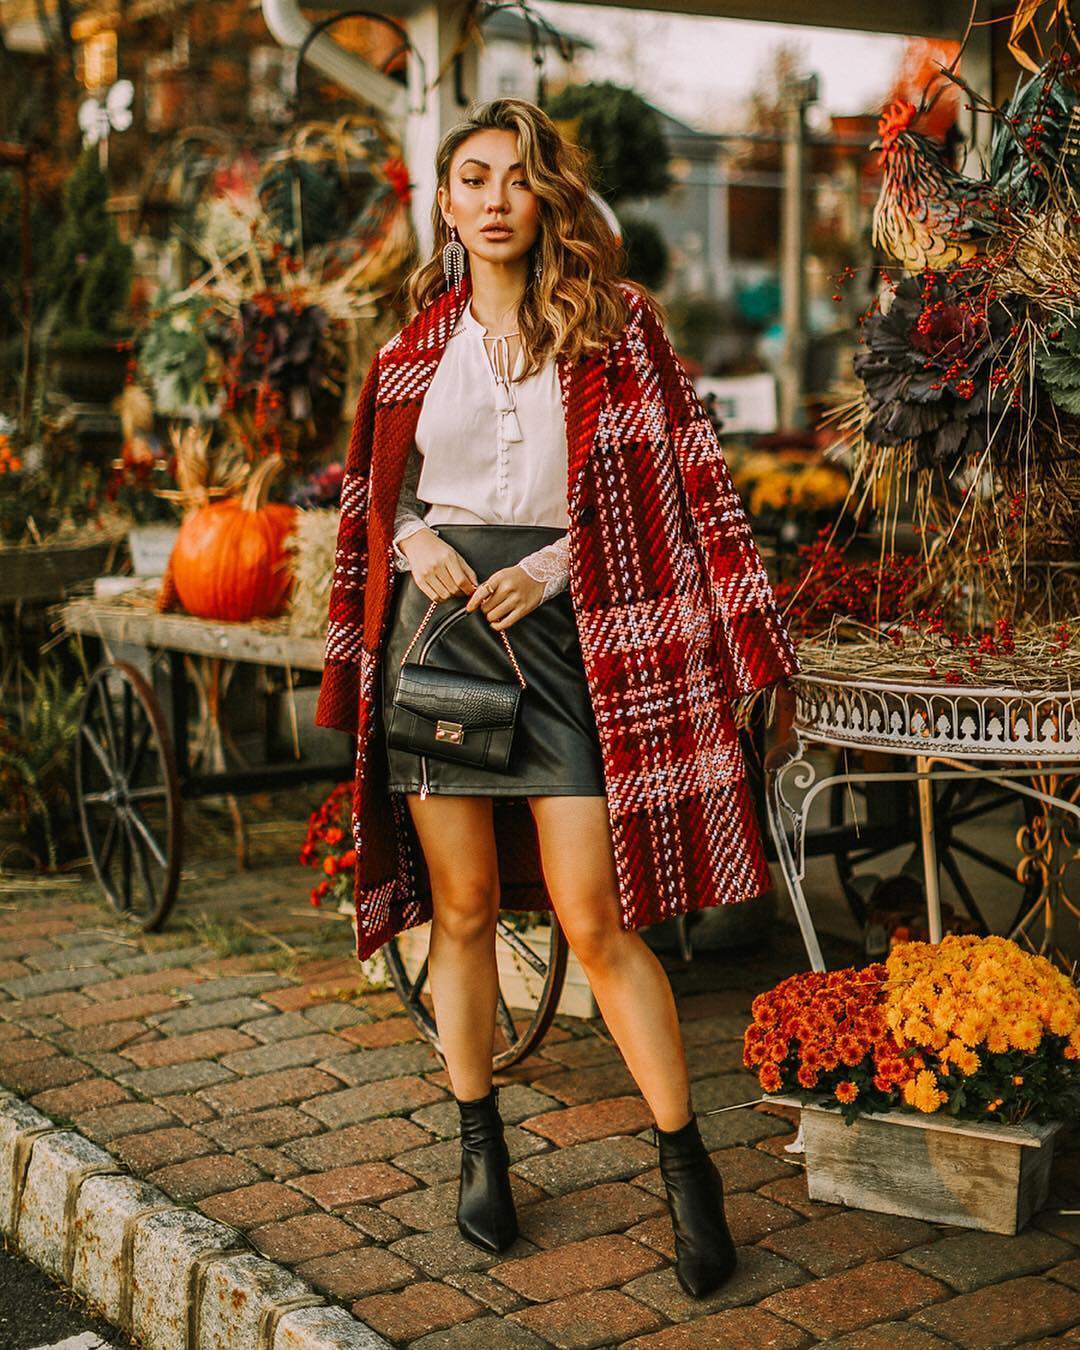 Plaid Coat With Black Leather Skirt And
Matching Boots Outfit